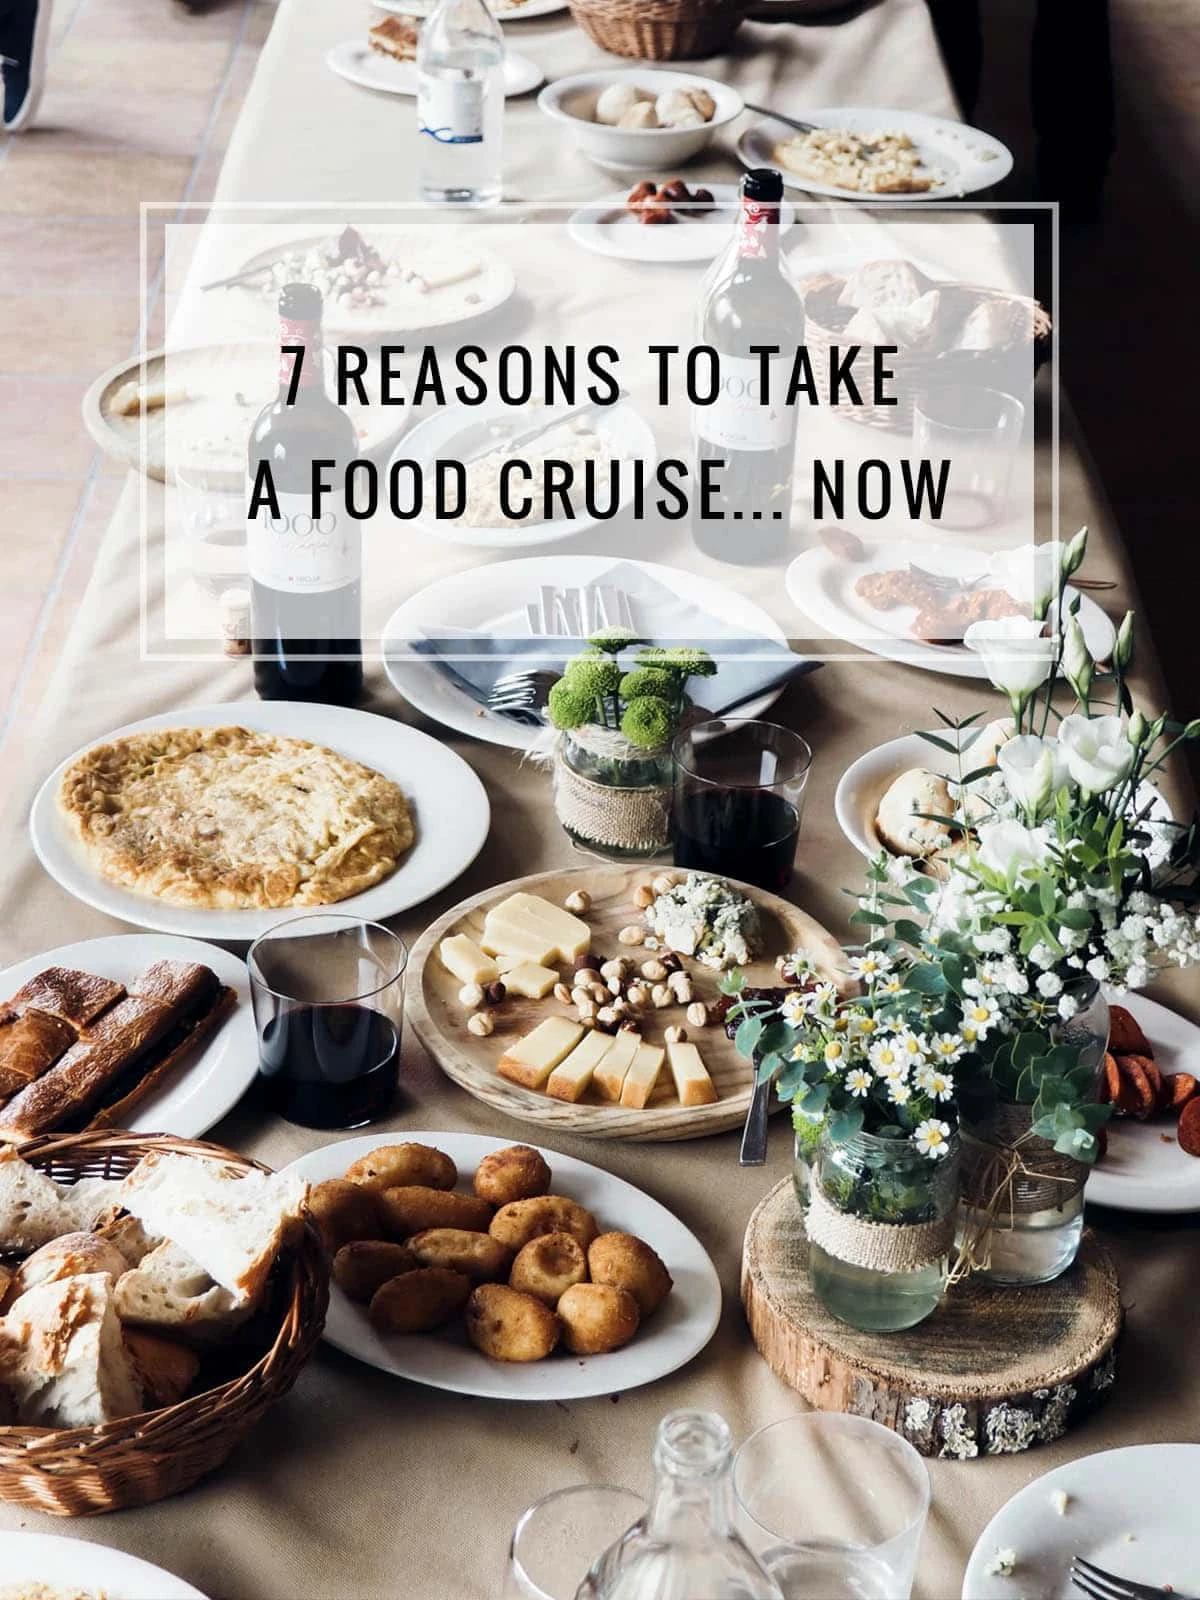 7 reasons to take a food cruise titl